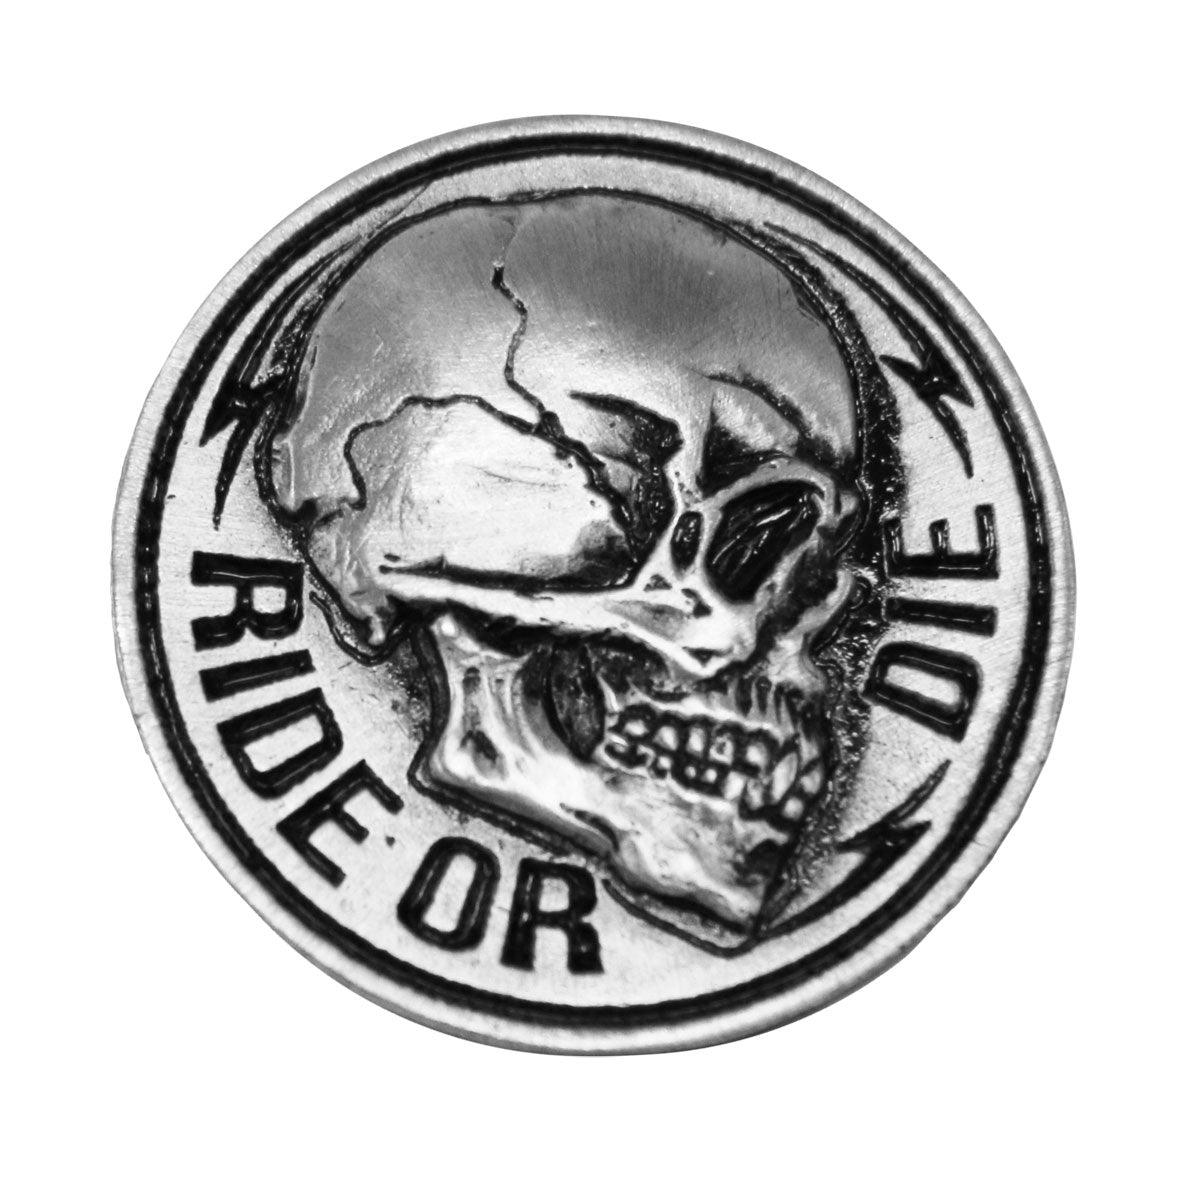 Hot Leathers Side Skull Pin - American Legend Rider